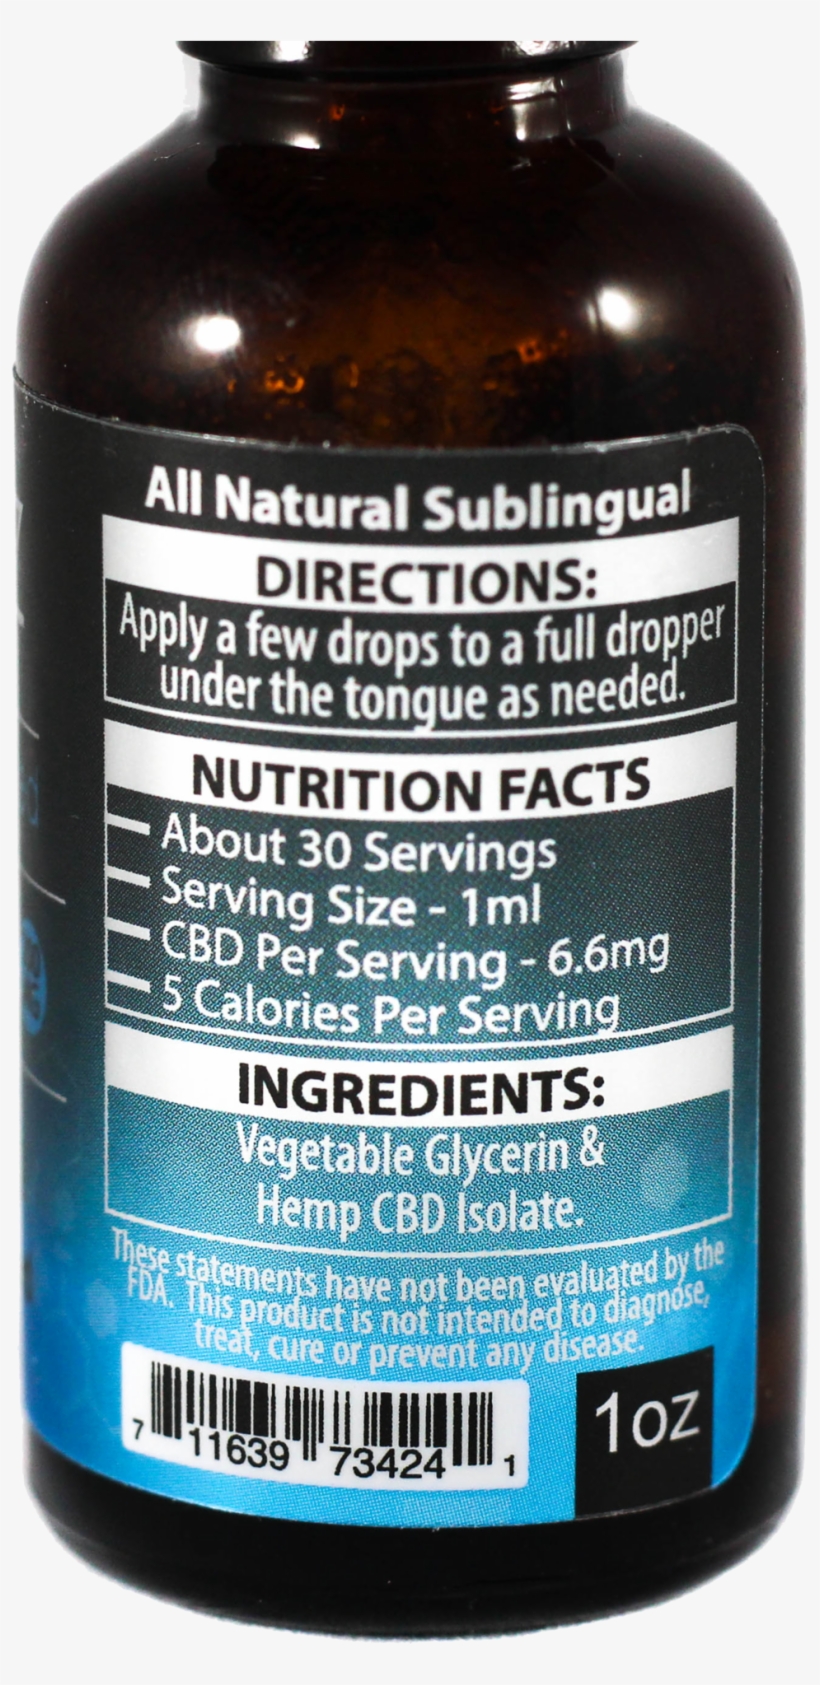 Load Image Into Gallery Viewer, 200mg Hemp Cbd Tincture - Tincture Of Cannabis, transparent png #2217394